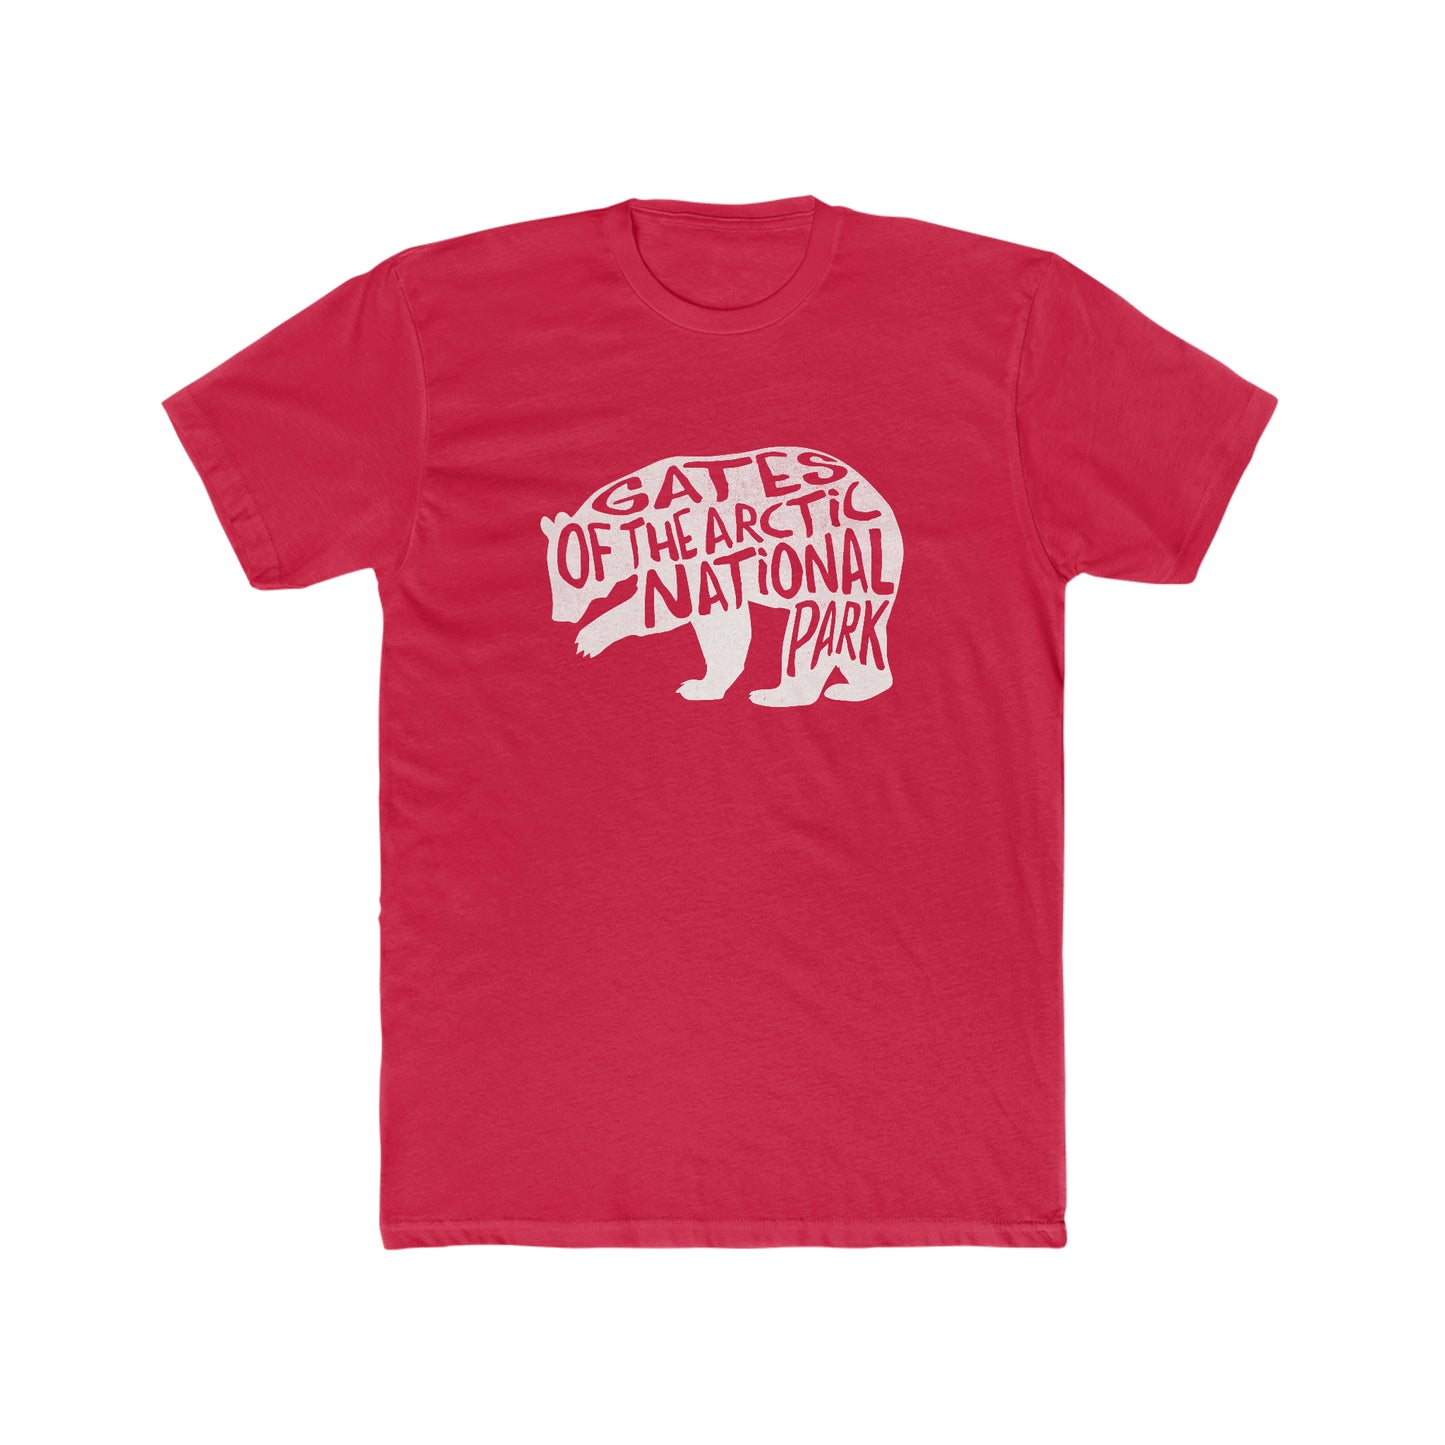 Gates of the Arctic National Park T-Shirt - Grizzly Bear